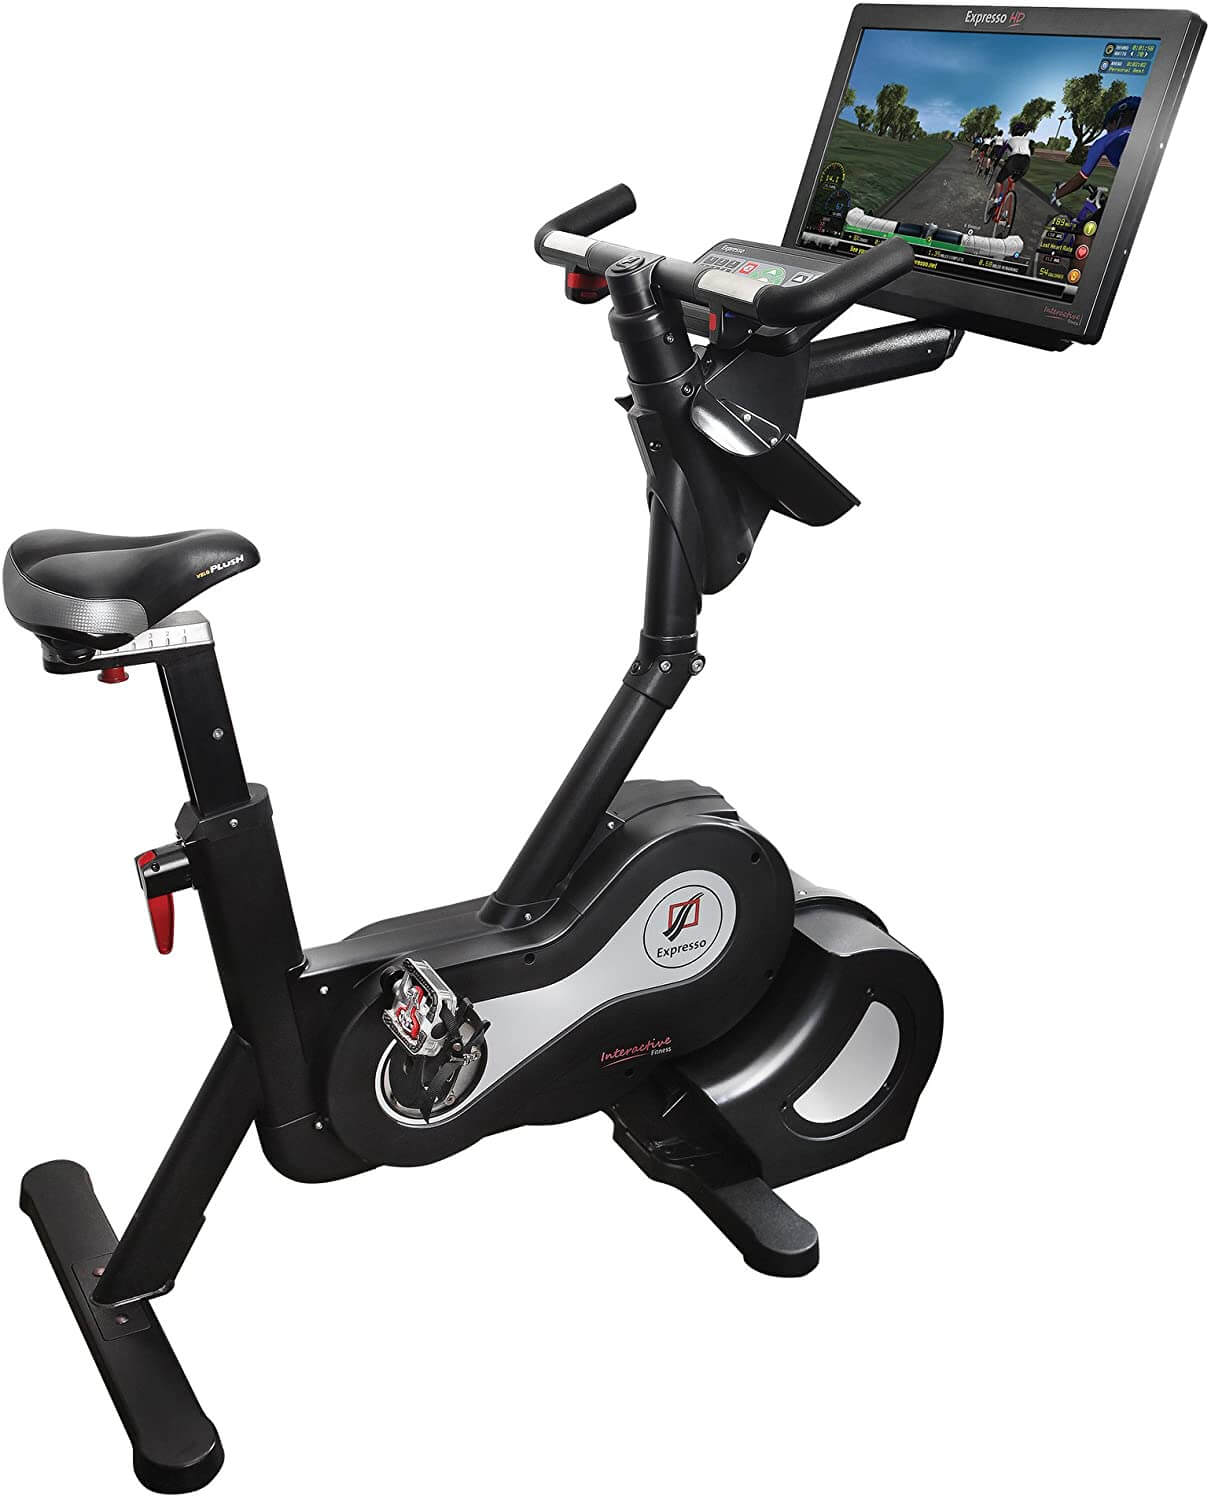 Expresso Fitness HD Upright Bike With Interactive Games Review